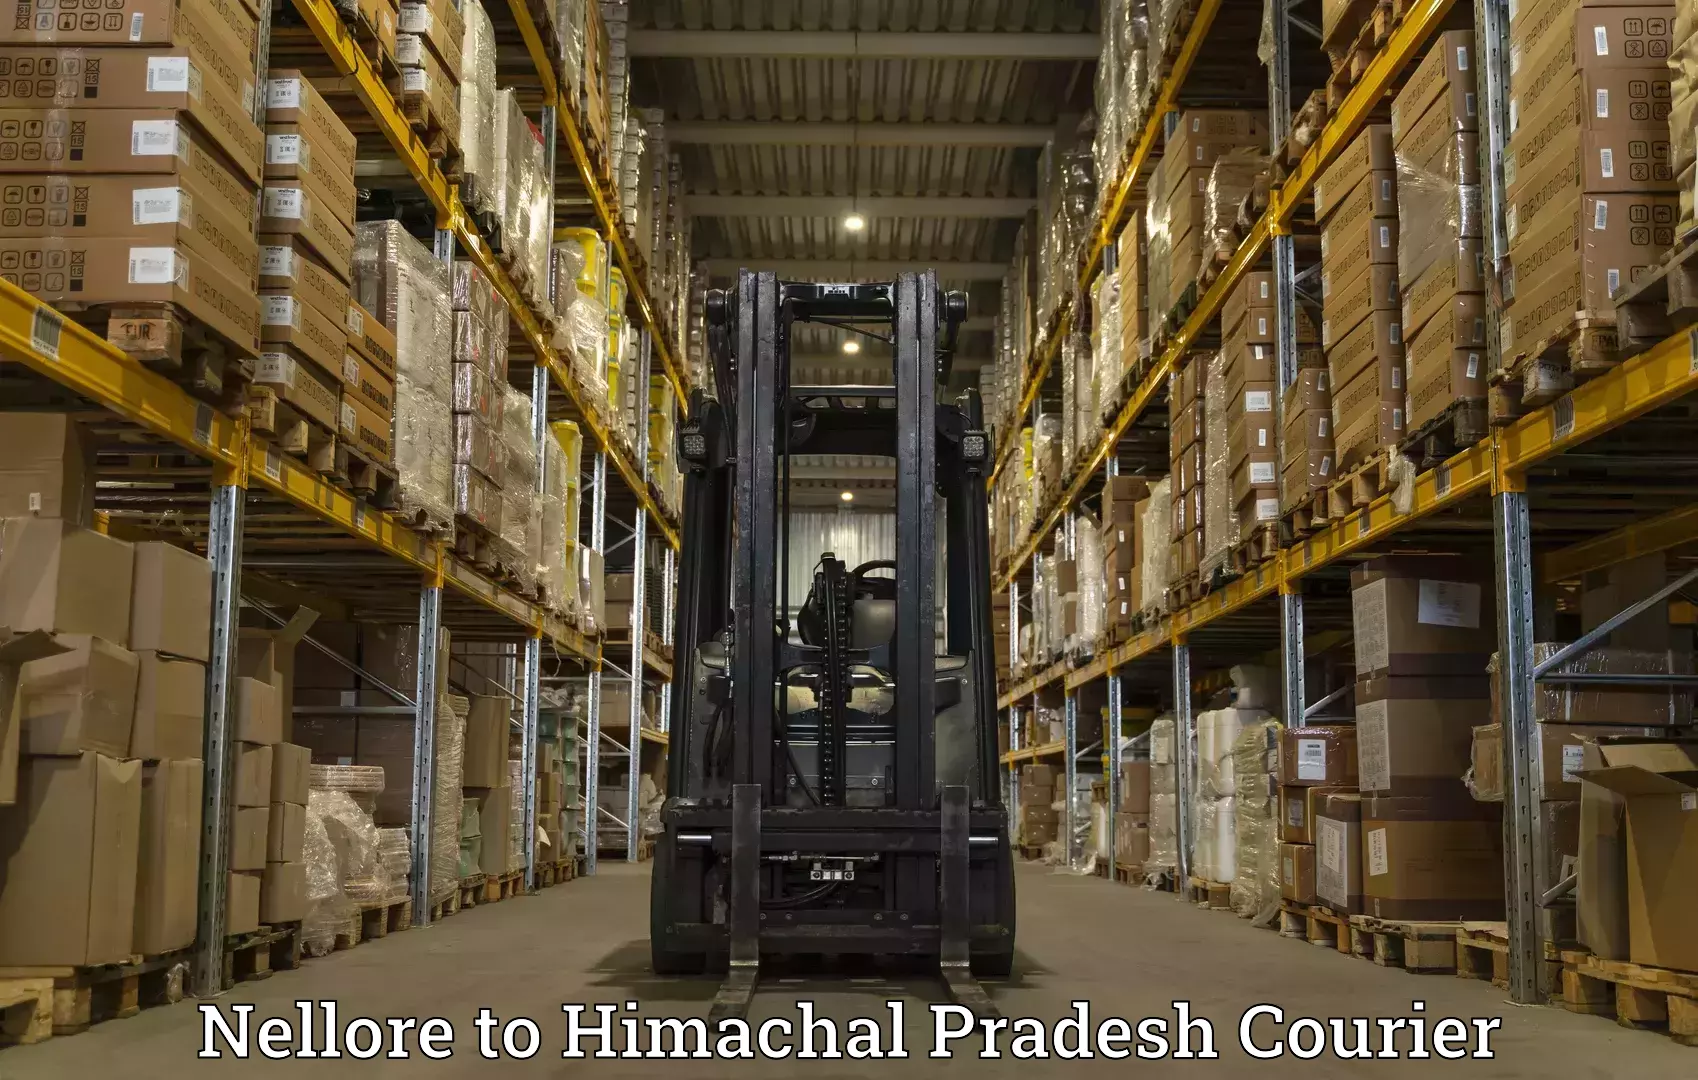 Enhanced tracking features Nellore to Himachal Pradesh